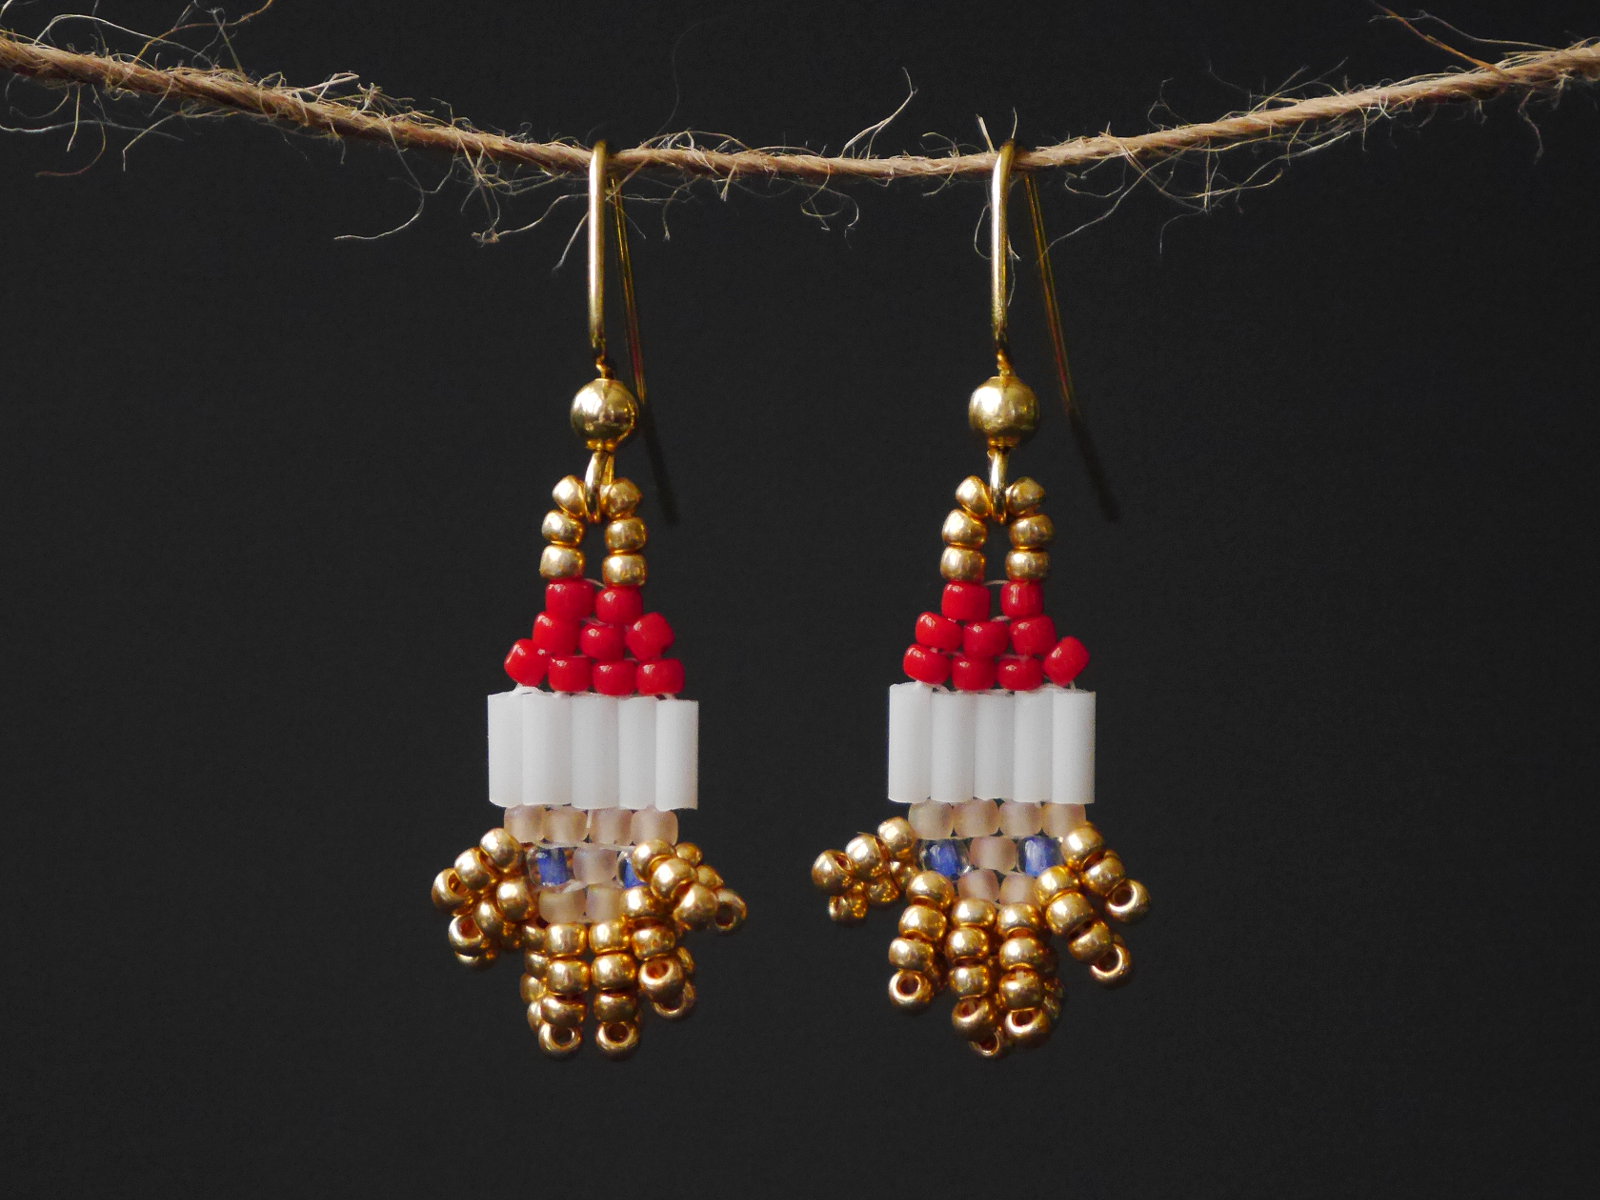 Details about   3-D Santa Claus Hand-Beaded Earrings w/ Hypo Allergenic Earwires 